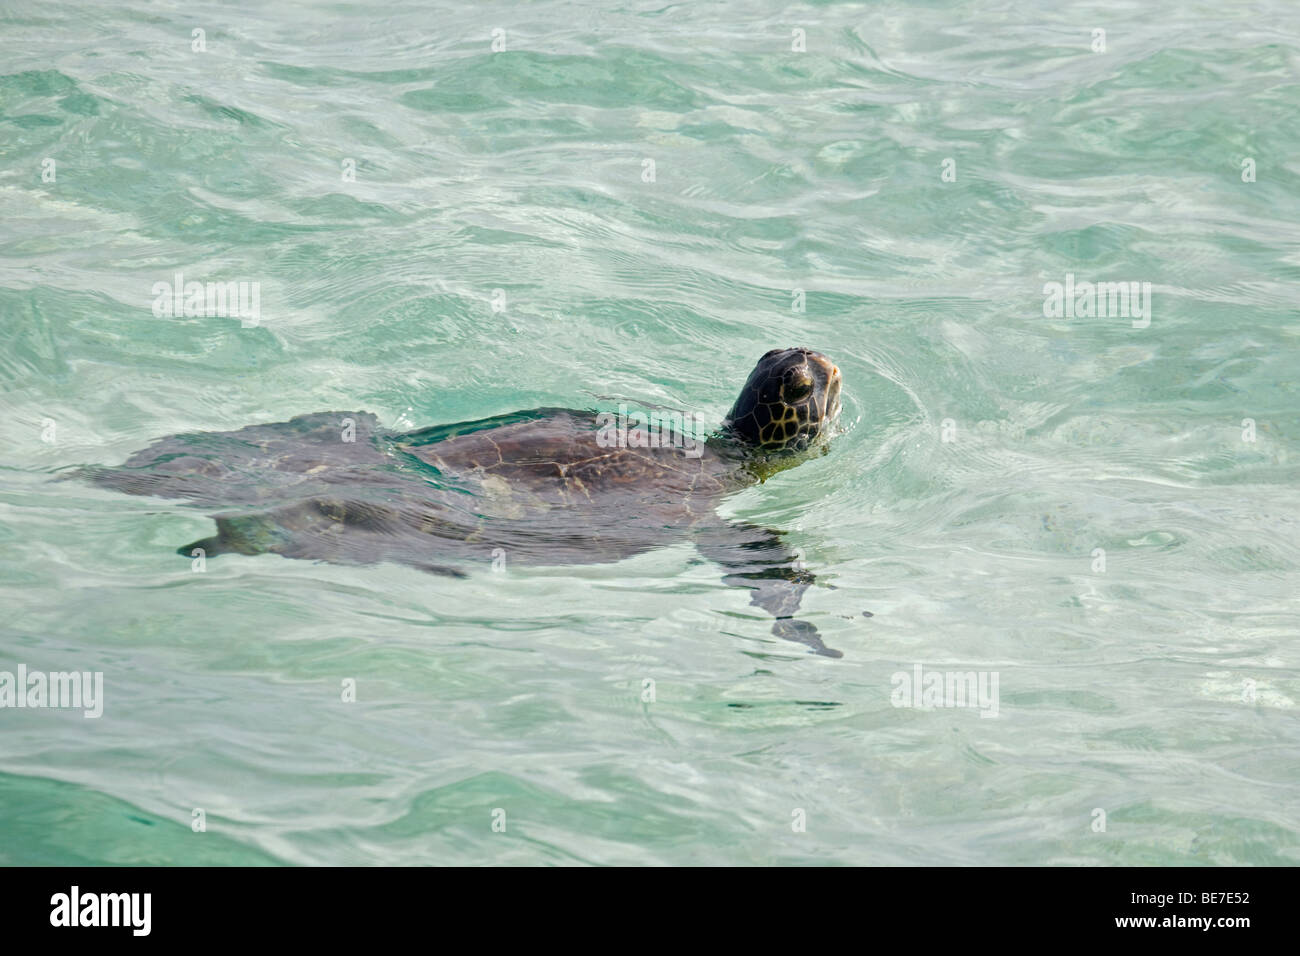 Hawaiian Green Sea Turtle surfacing to breathe in the Pacific Ocean at  Midway Atoll.  Chelonia mydas, Stock Photo